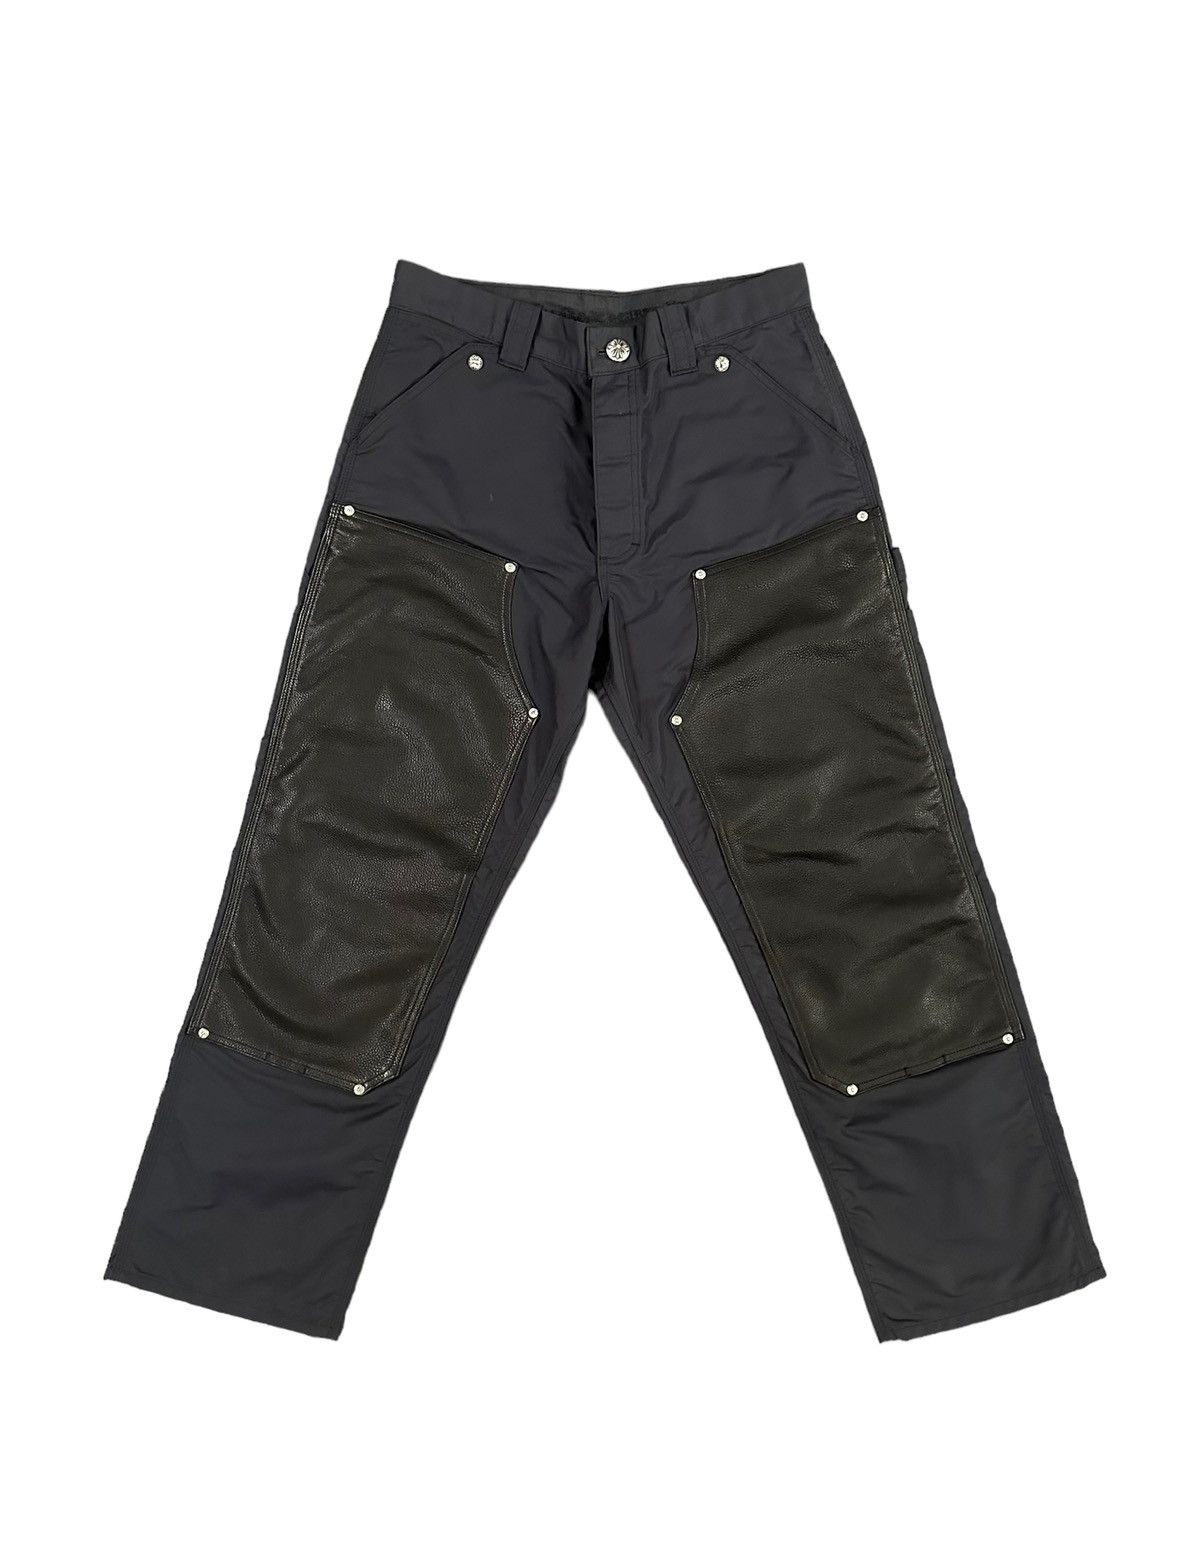 Chrome Hearts Leather Knee Cross Patch Carpenter Pants | Grailed